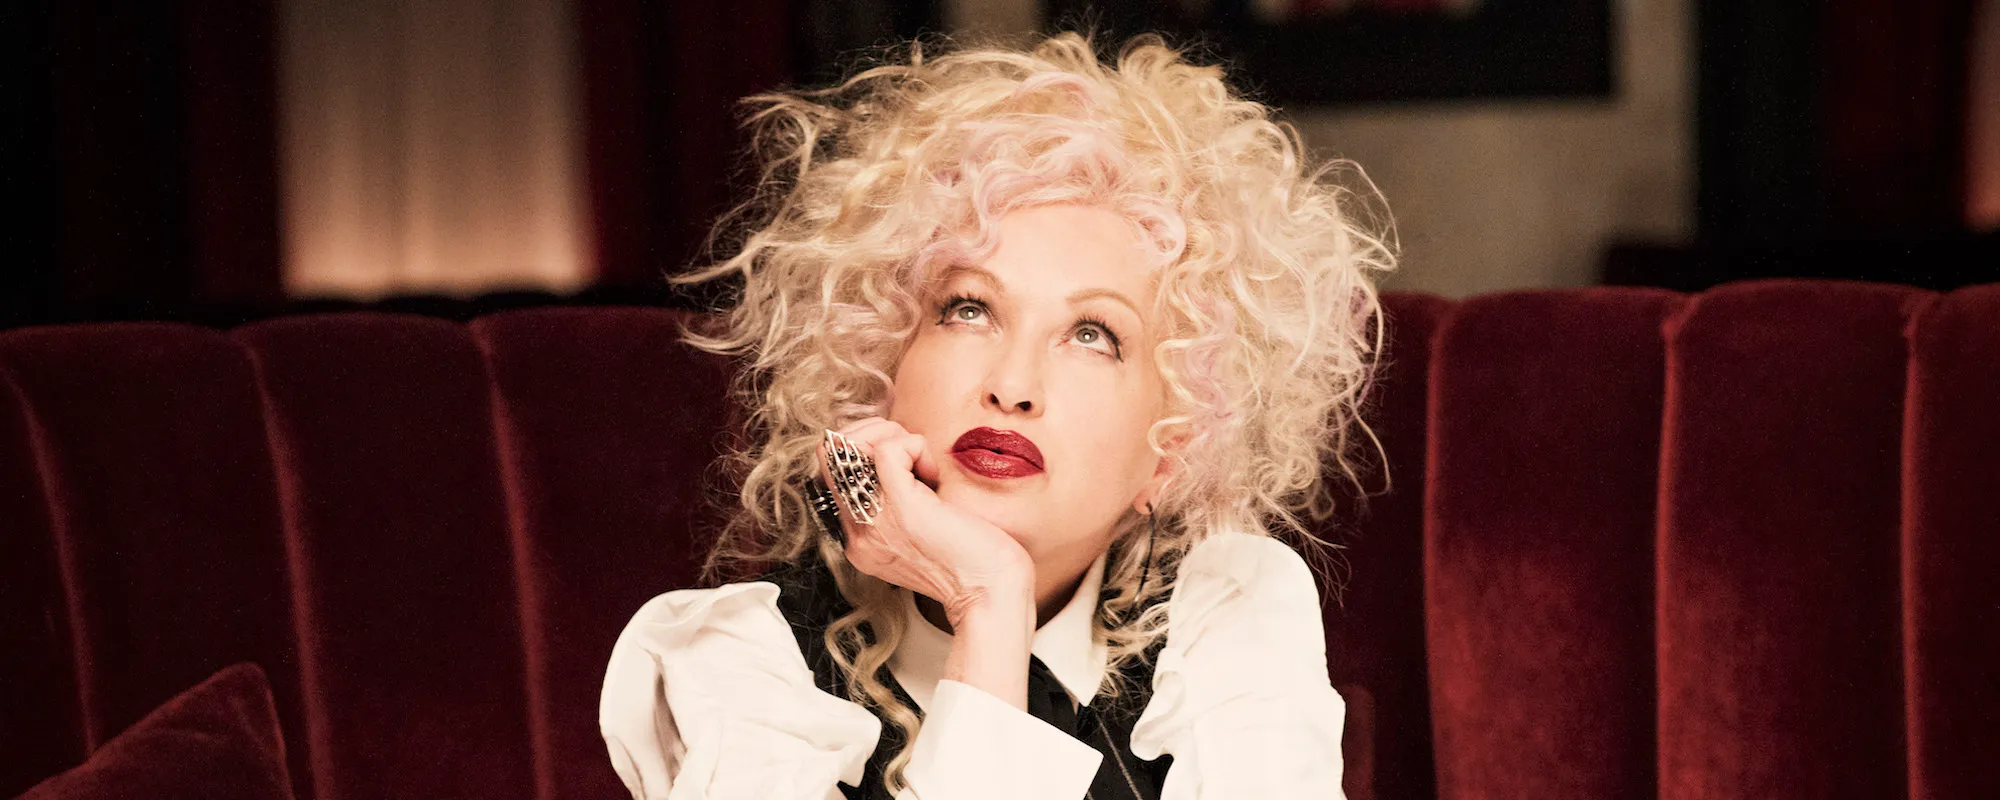 4 Songs You Didn’t Know Cyndi Lauper Wrote for Other Artists